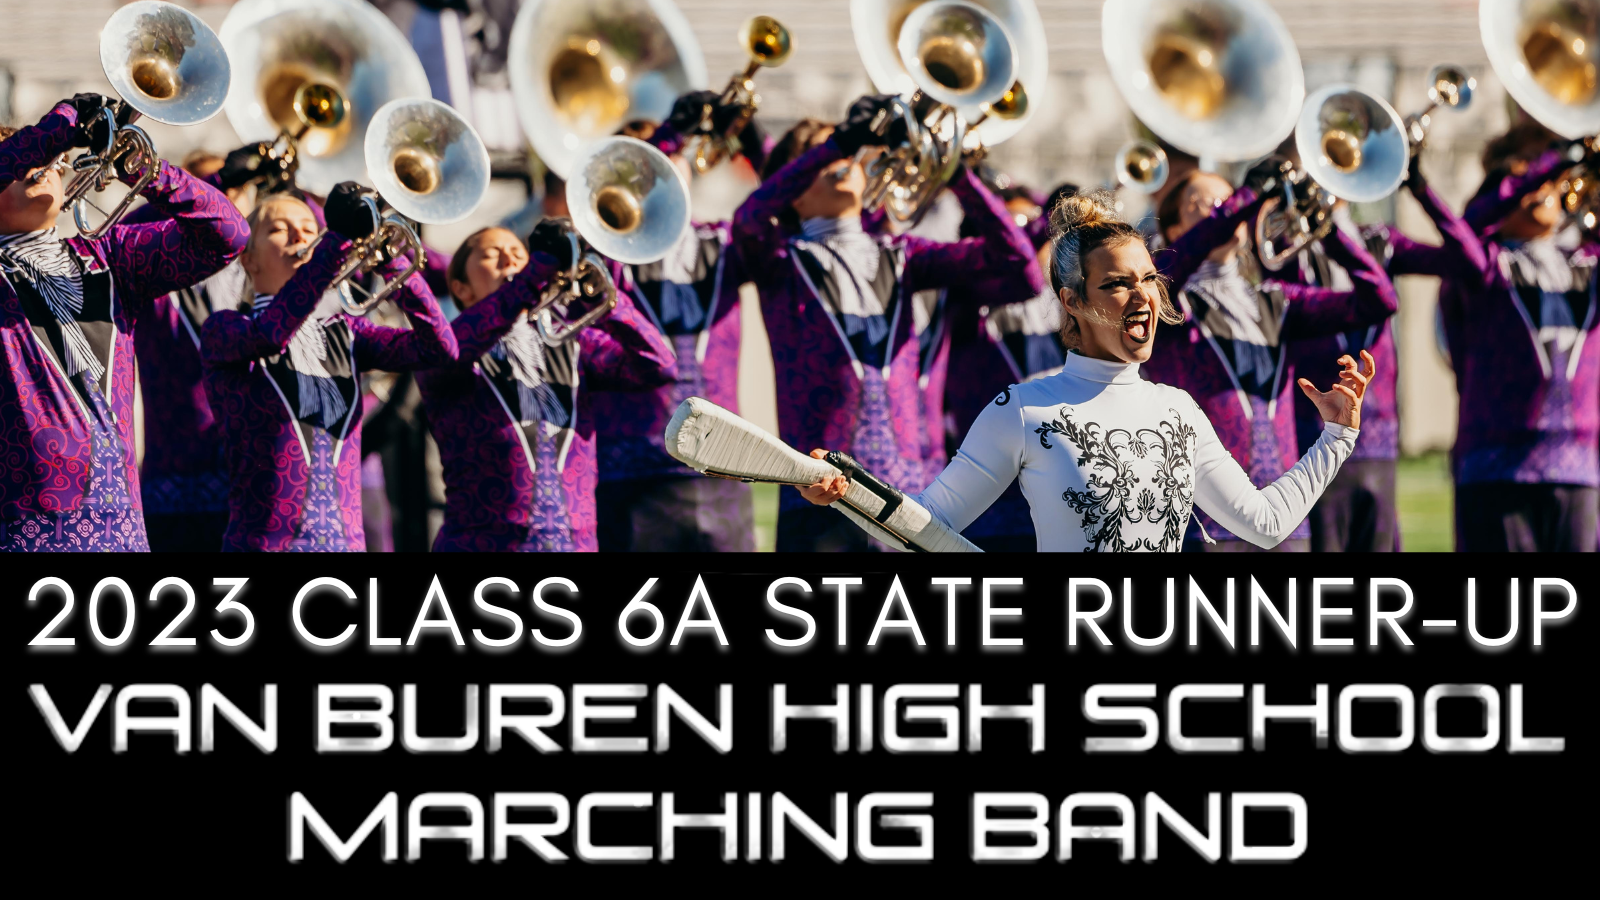 VBHS Marching Band named 6A State Runner-up 